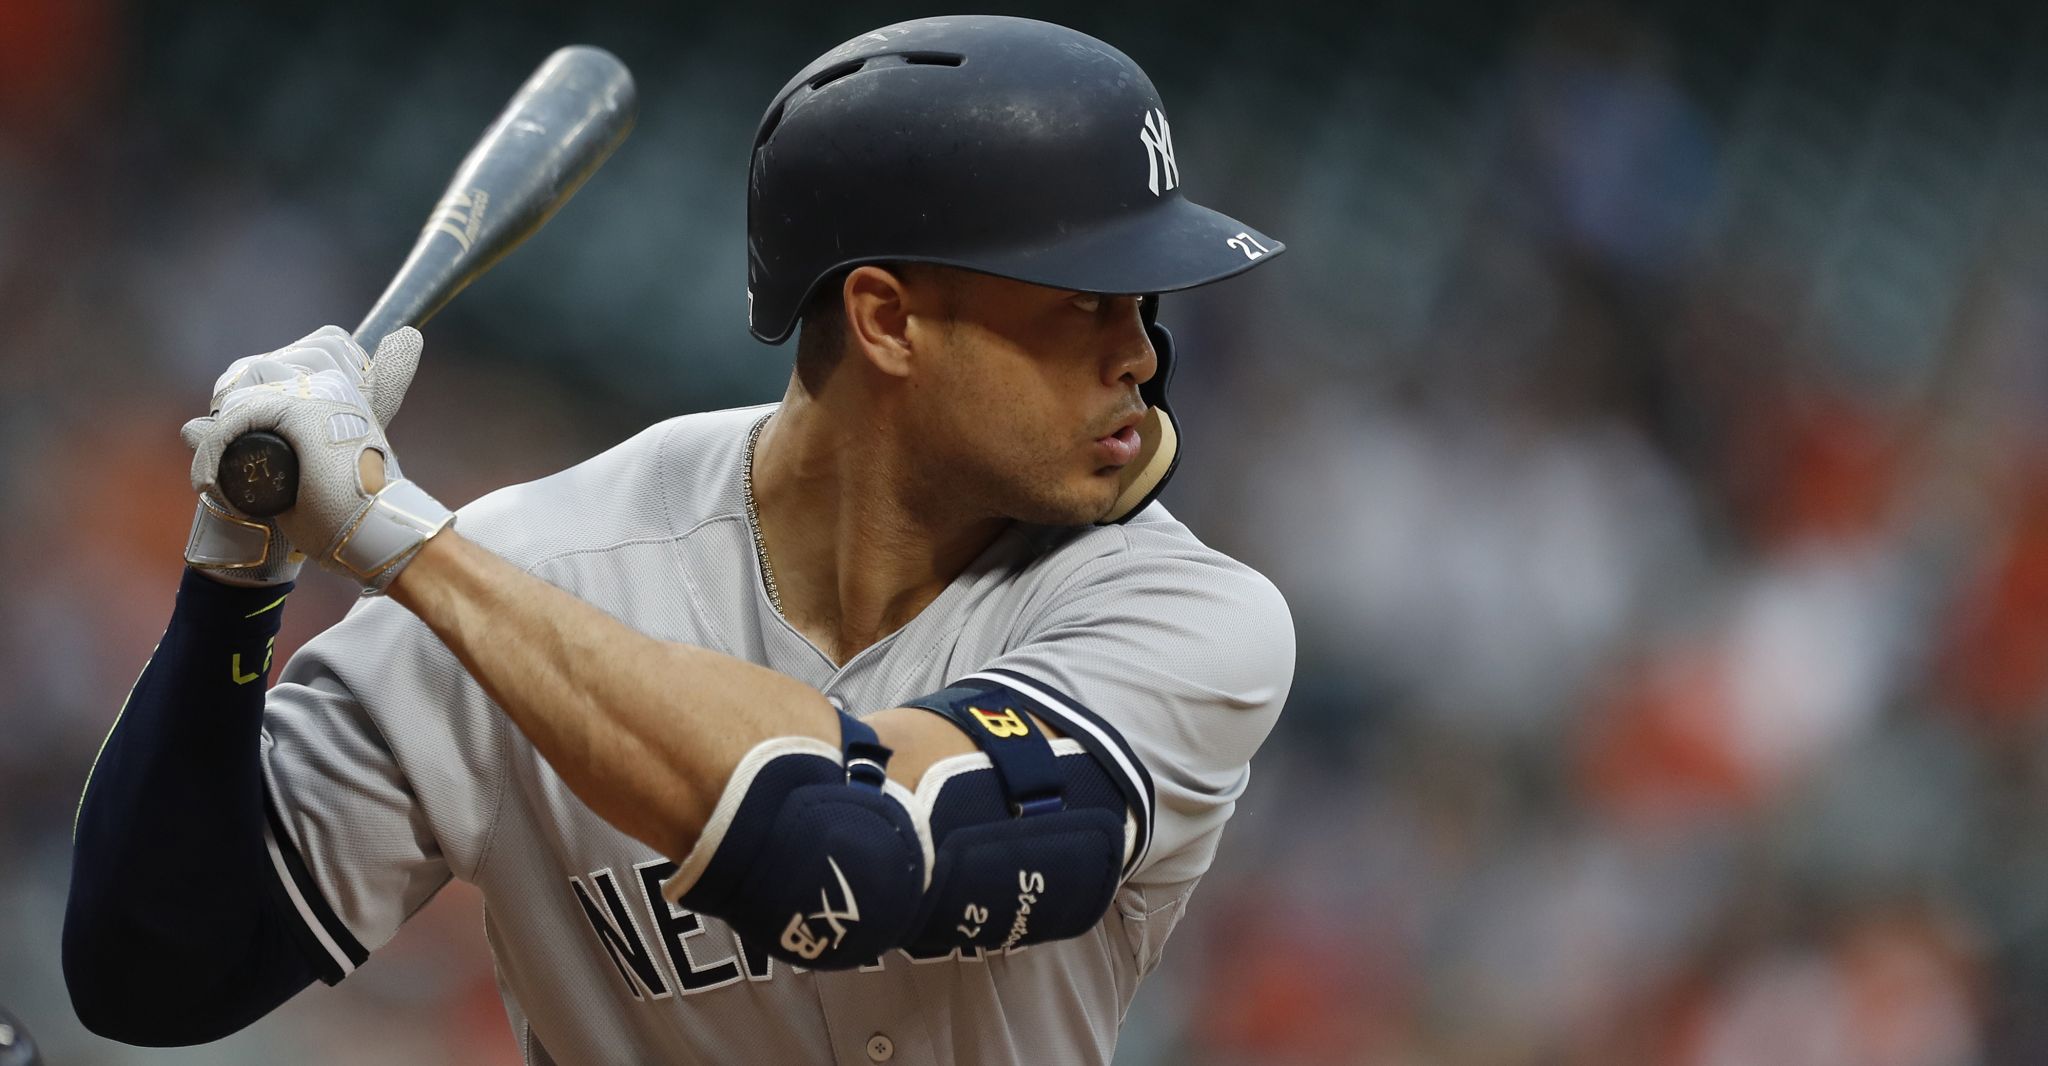 The Yankees need Giancarlo Stanton's bat to make the playoffs